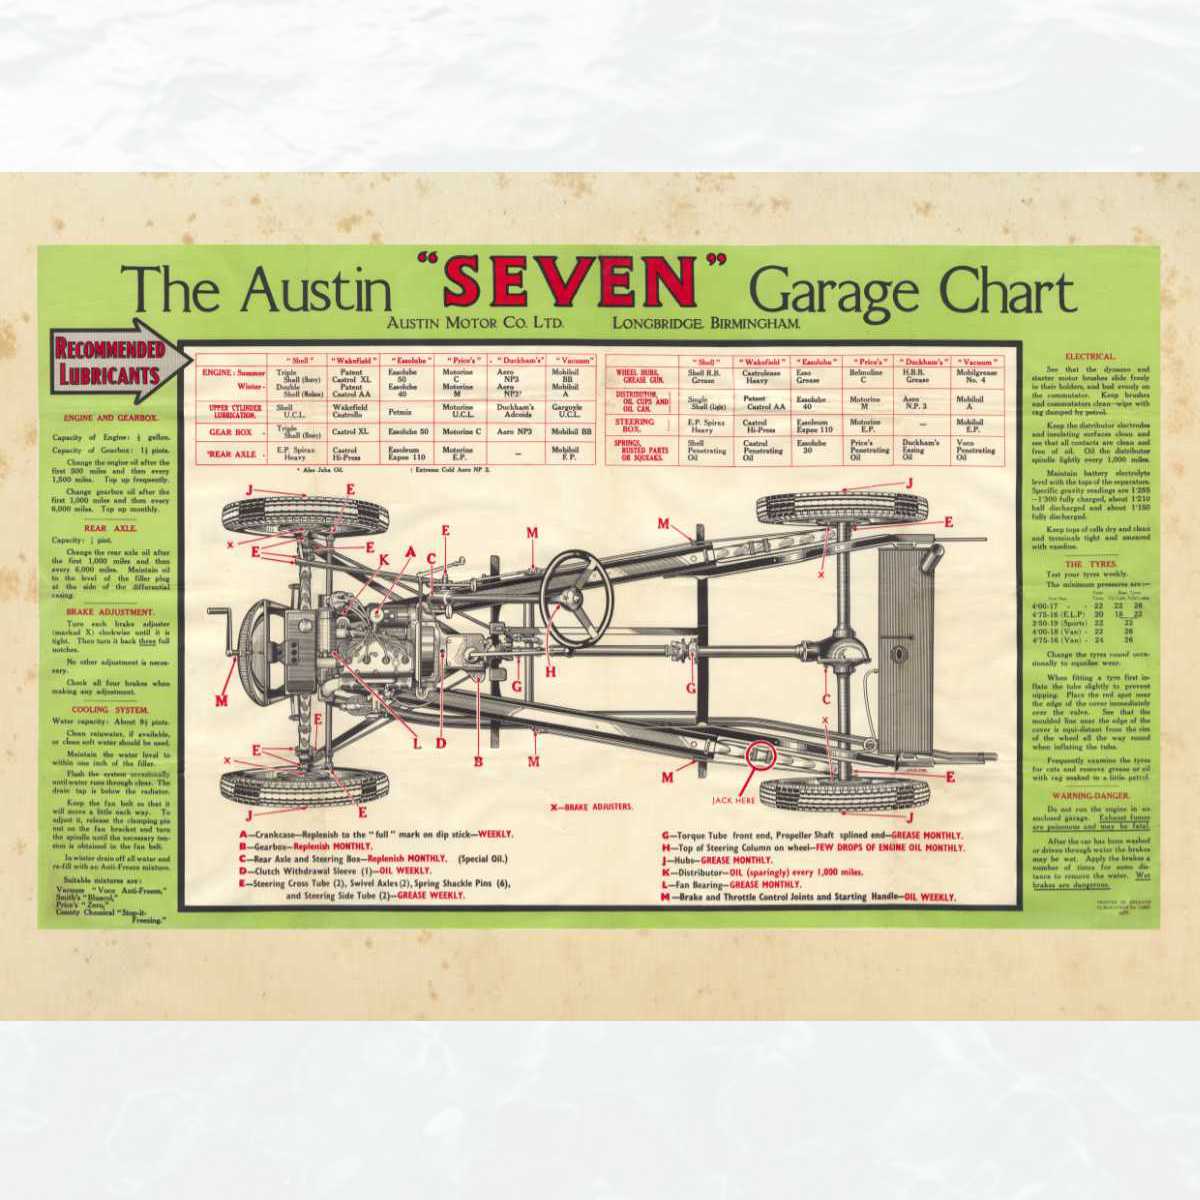 Austin Seven Garage Chart, reproduced from the 1937 chassis lubrication original